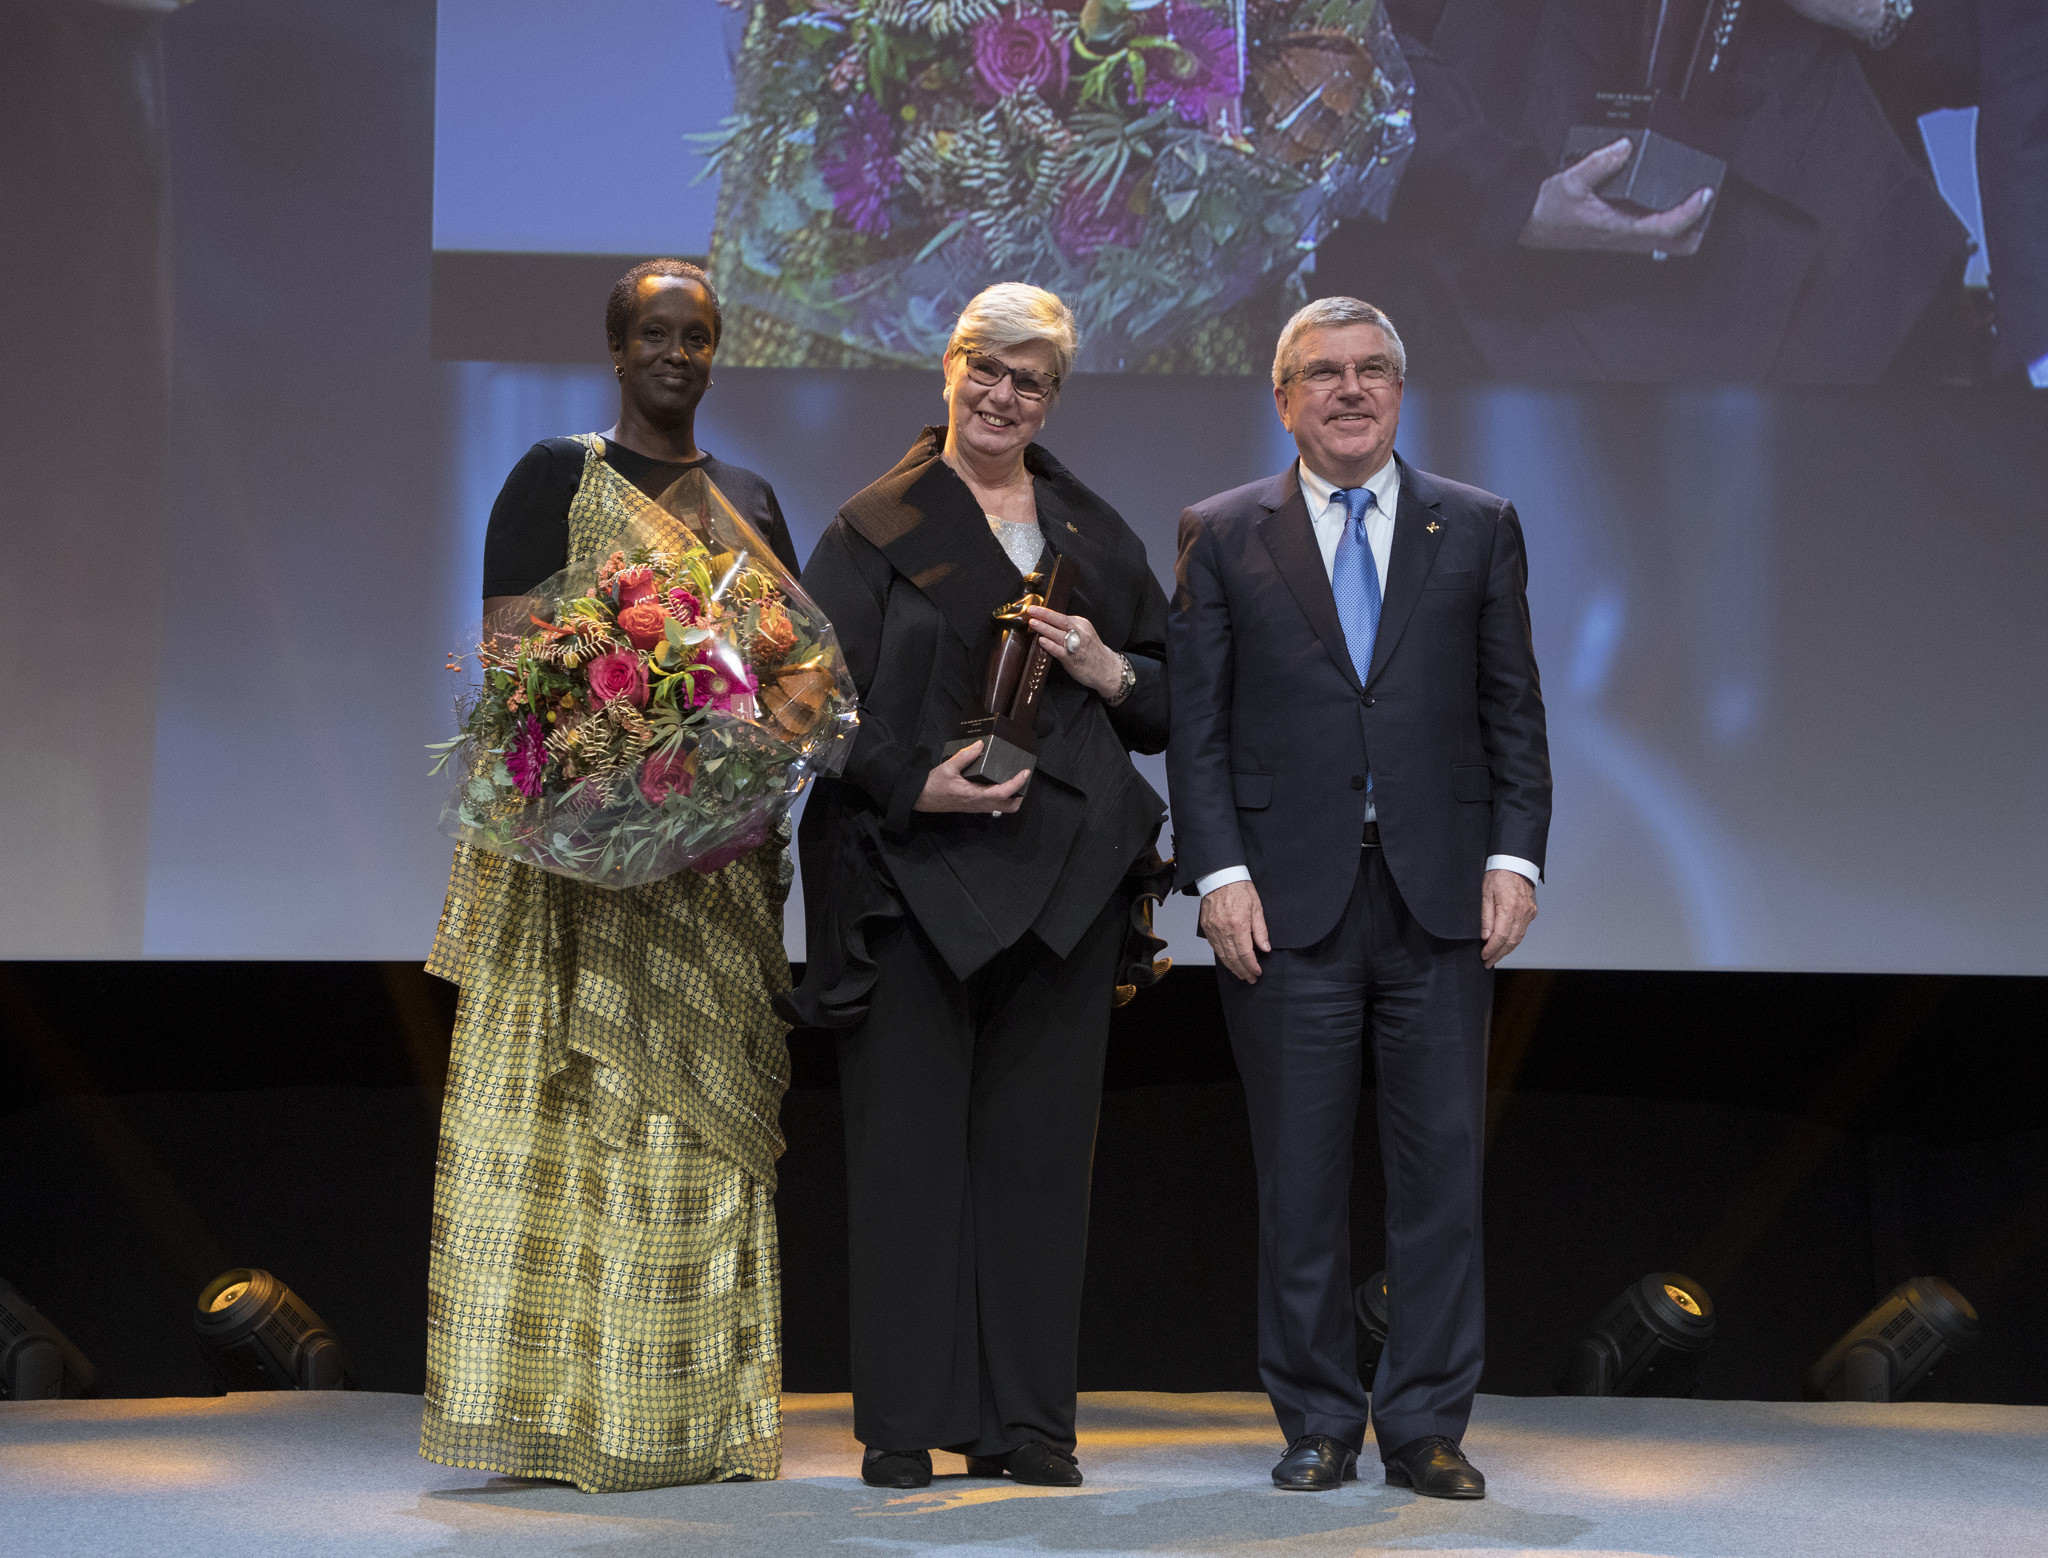 Finland's Birgitta Kervinen, centre, winner of the 2017 Women and Sport World Trophy, encouraged the game-changers to continue demanding for action ©IOC